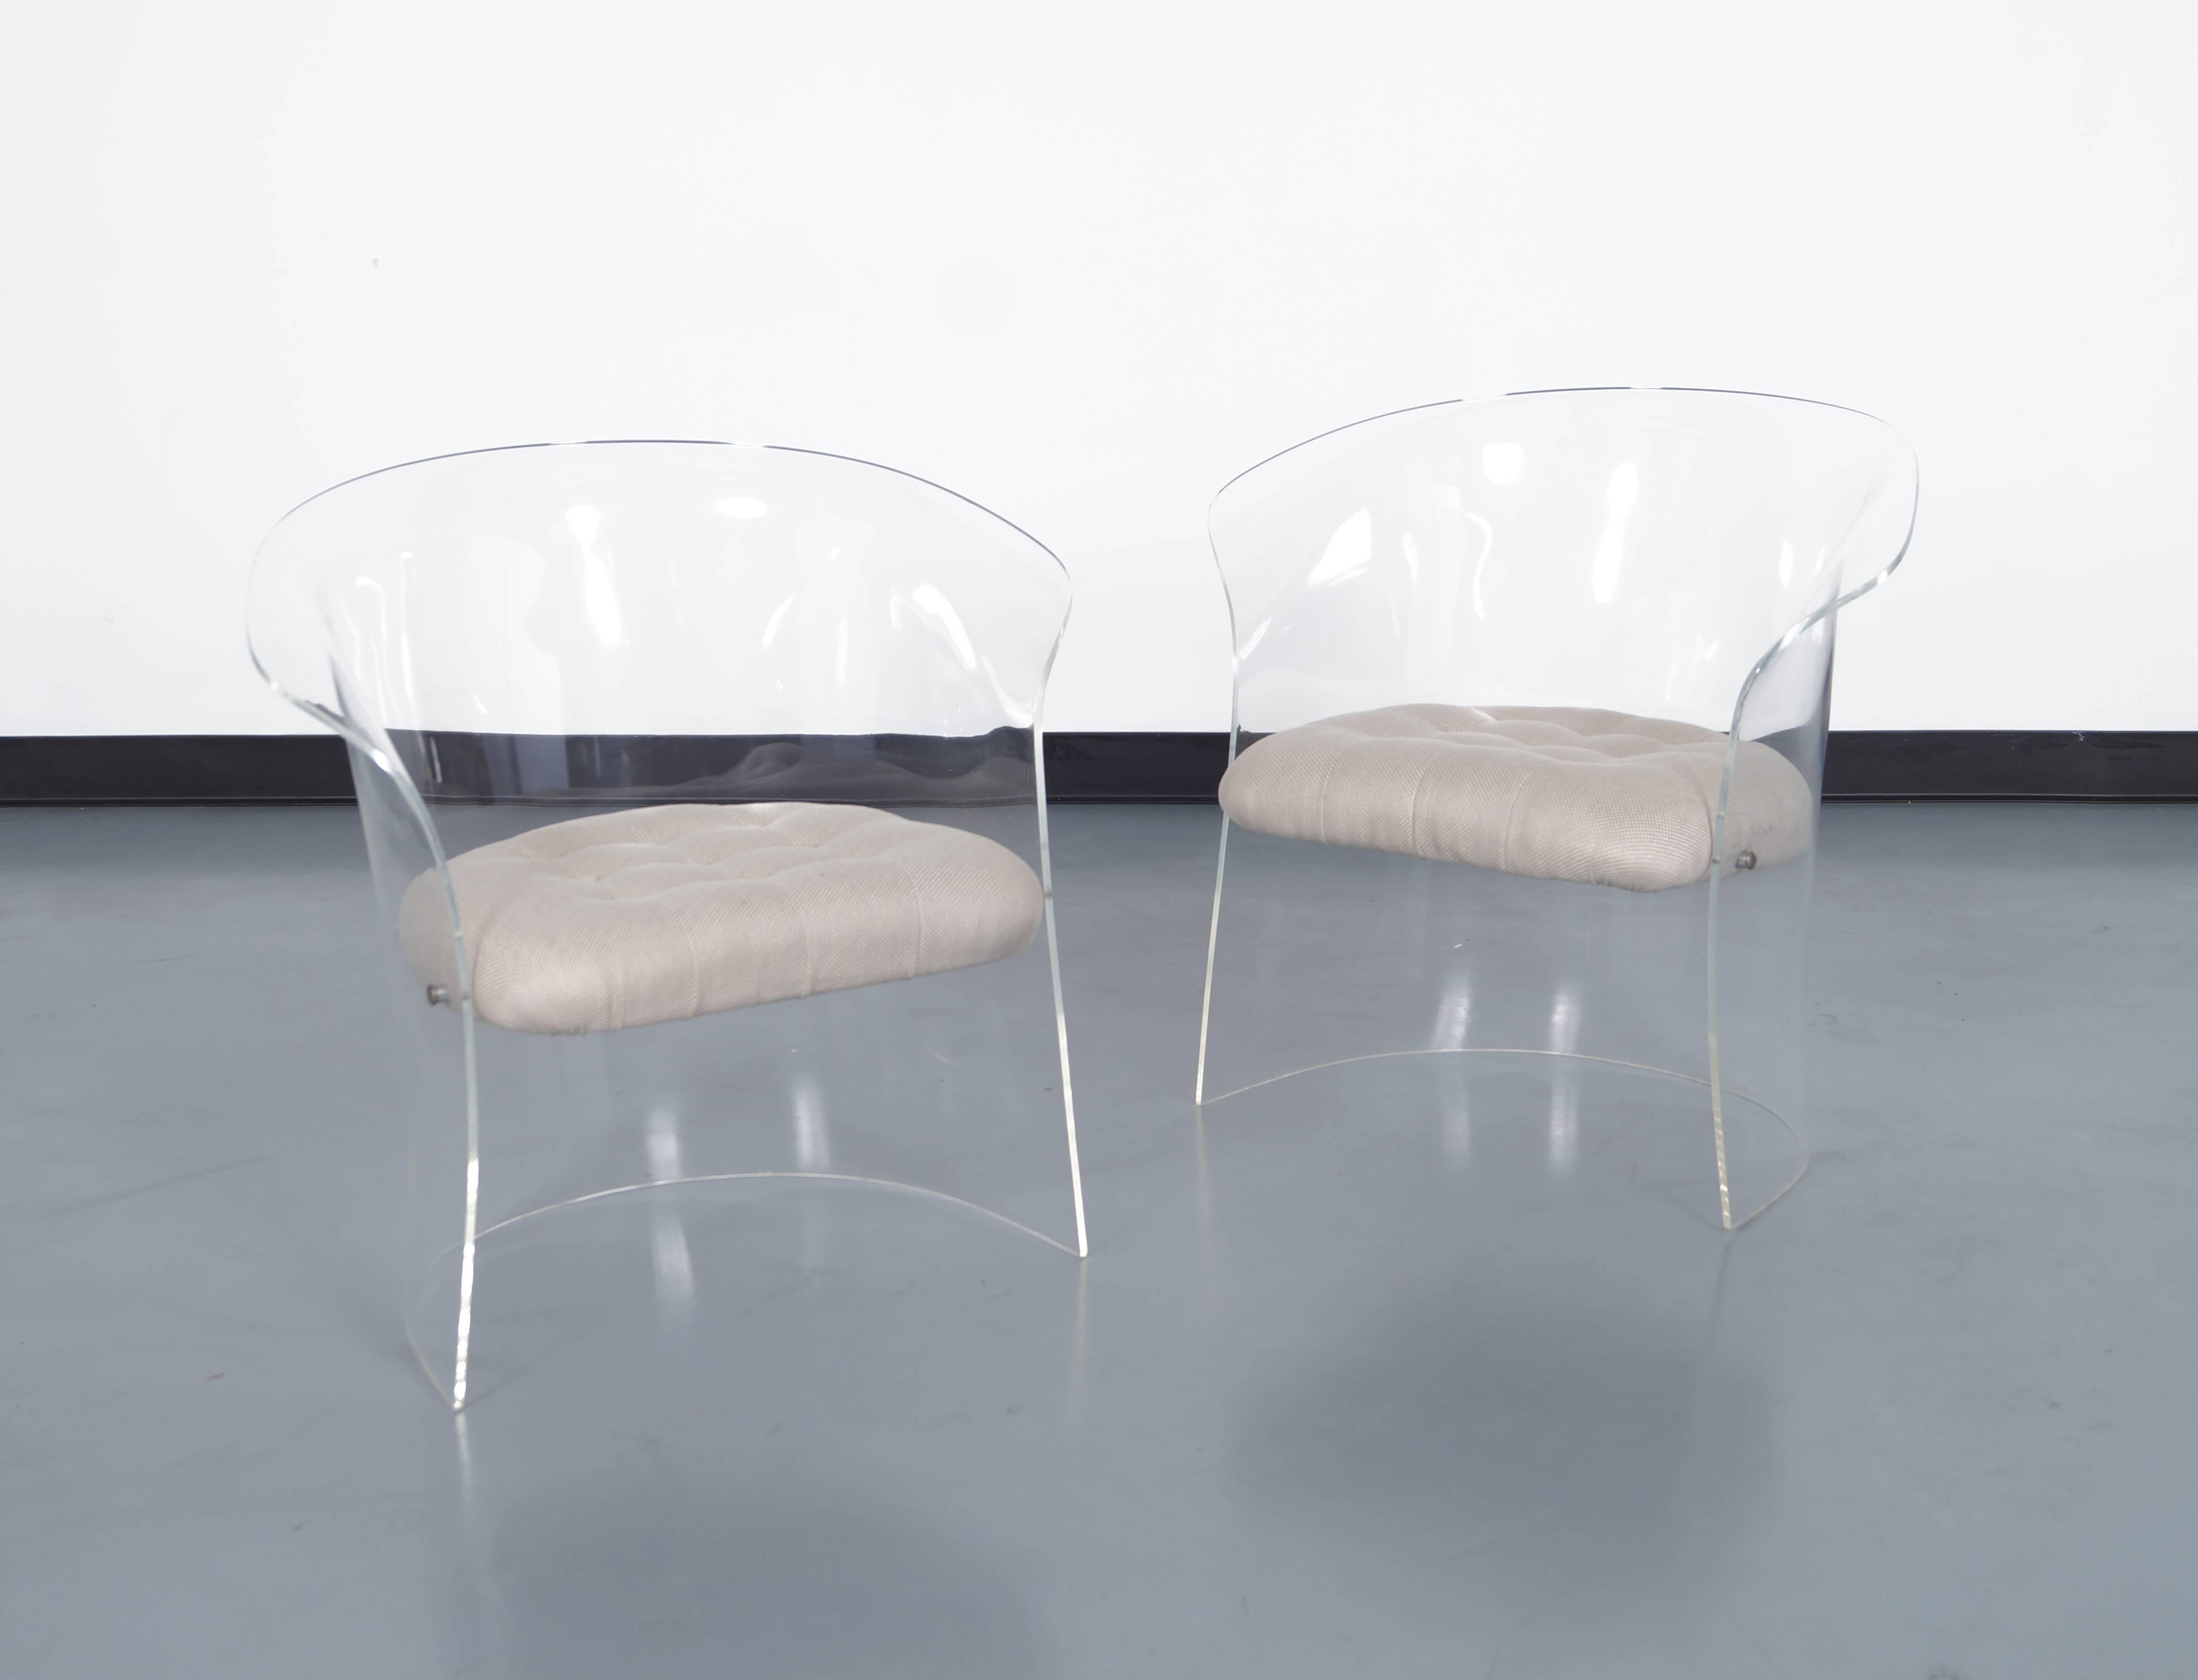 Pair of flexuous Lucite lounge chairs, circa early 1970s. These chairs have curved backs and sides. The seats are attached by chrome covers.